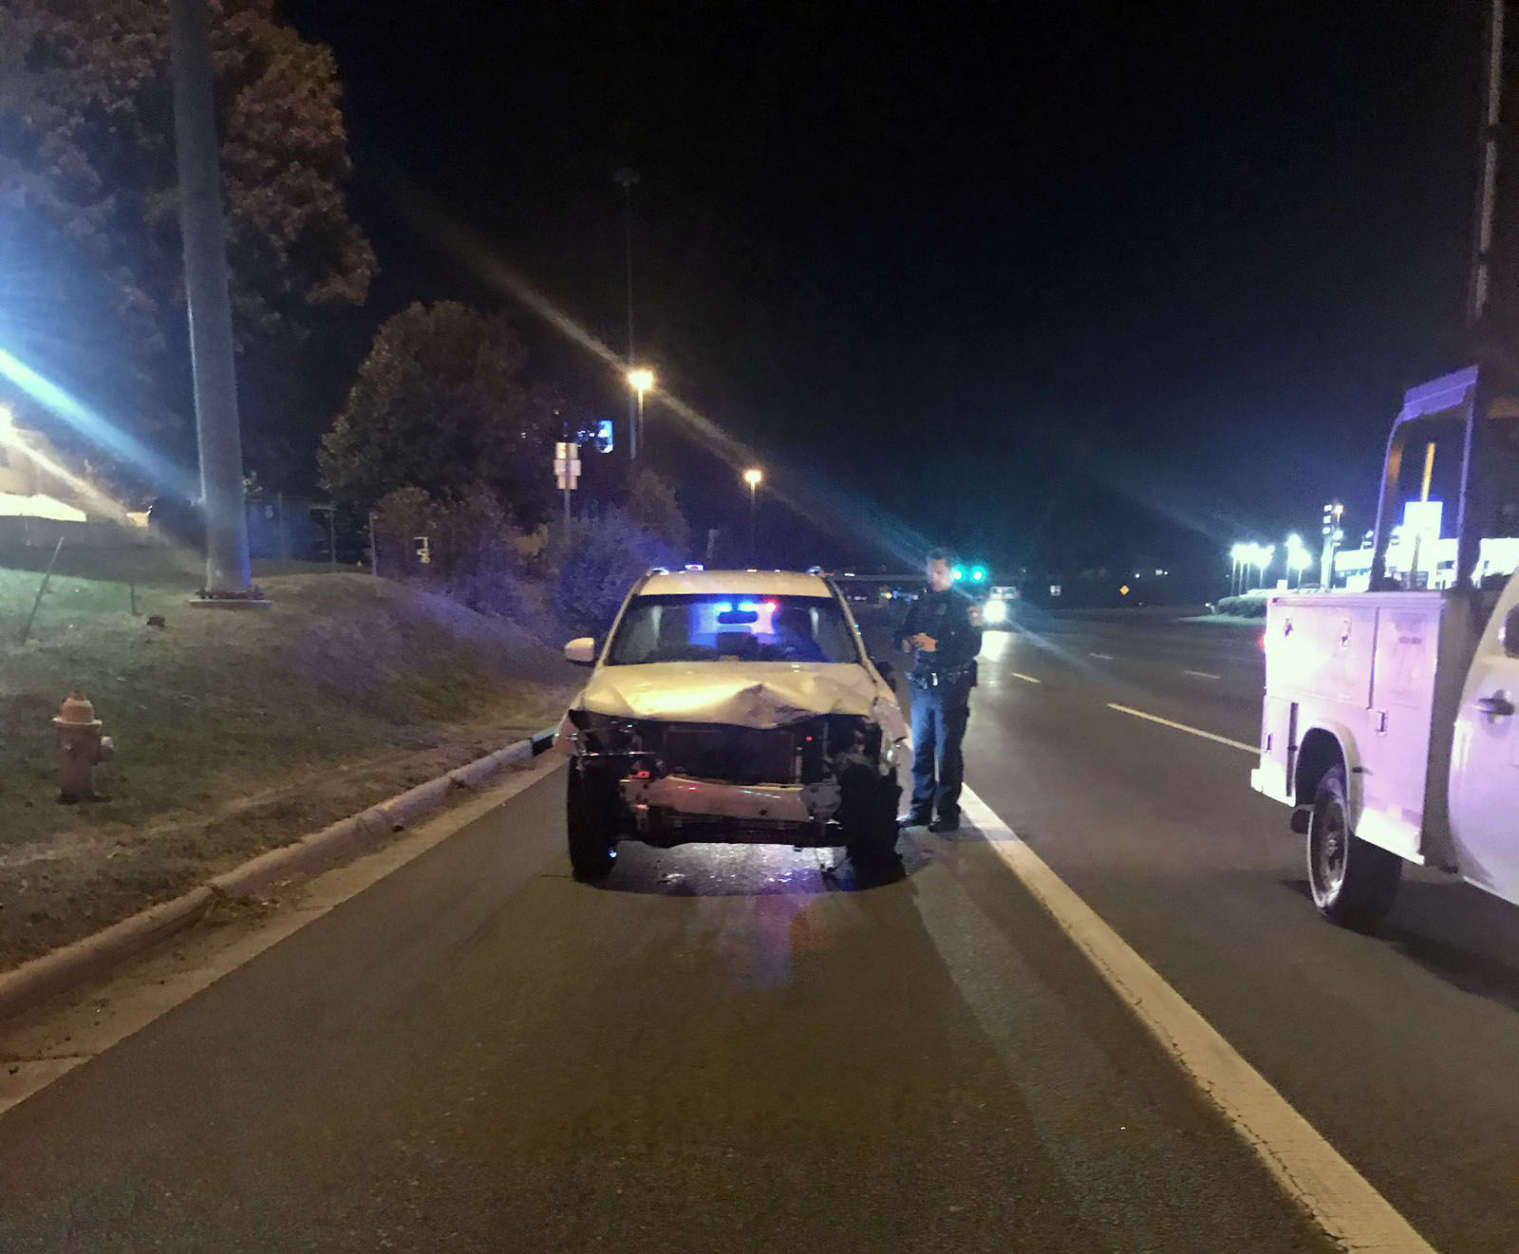 A Virginia man has been arrested and charged with a DUI and one felony count for a hit-and-run following a fatal three-car collision on Interstate 66 early Sunday morning. (Courtesy Alfredo Panameno)